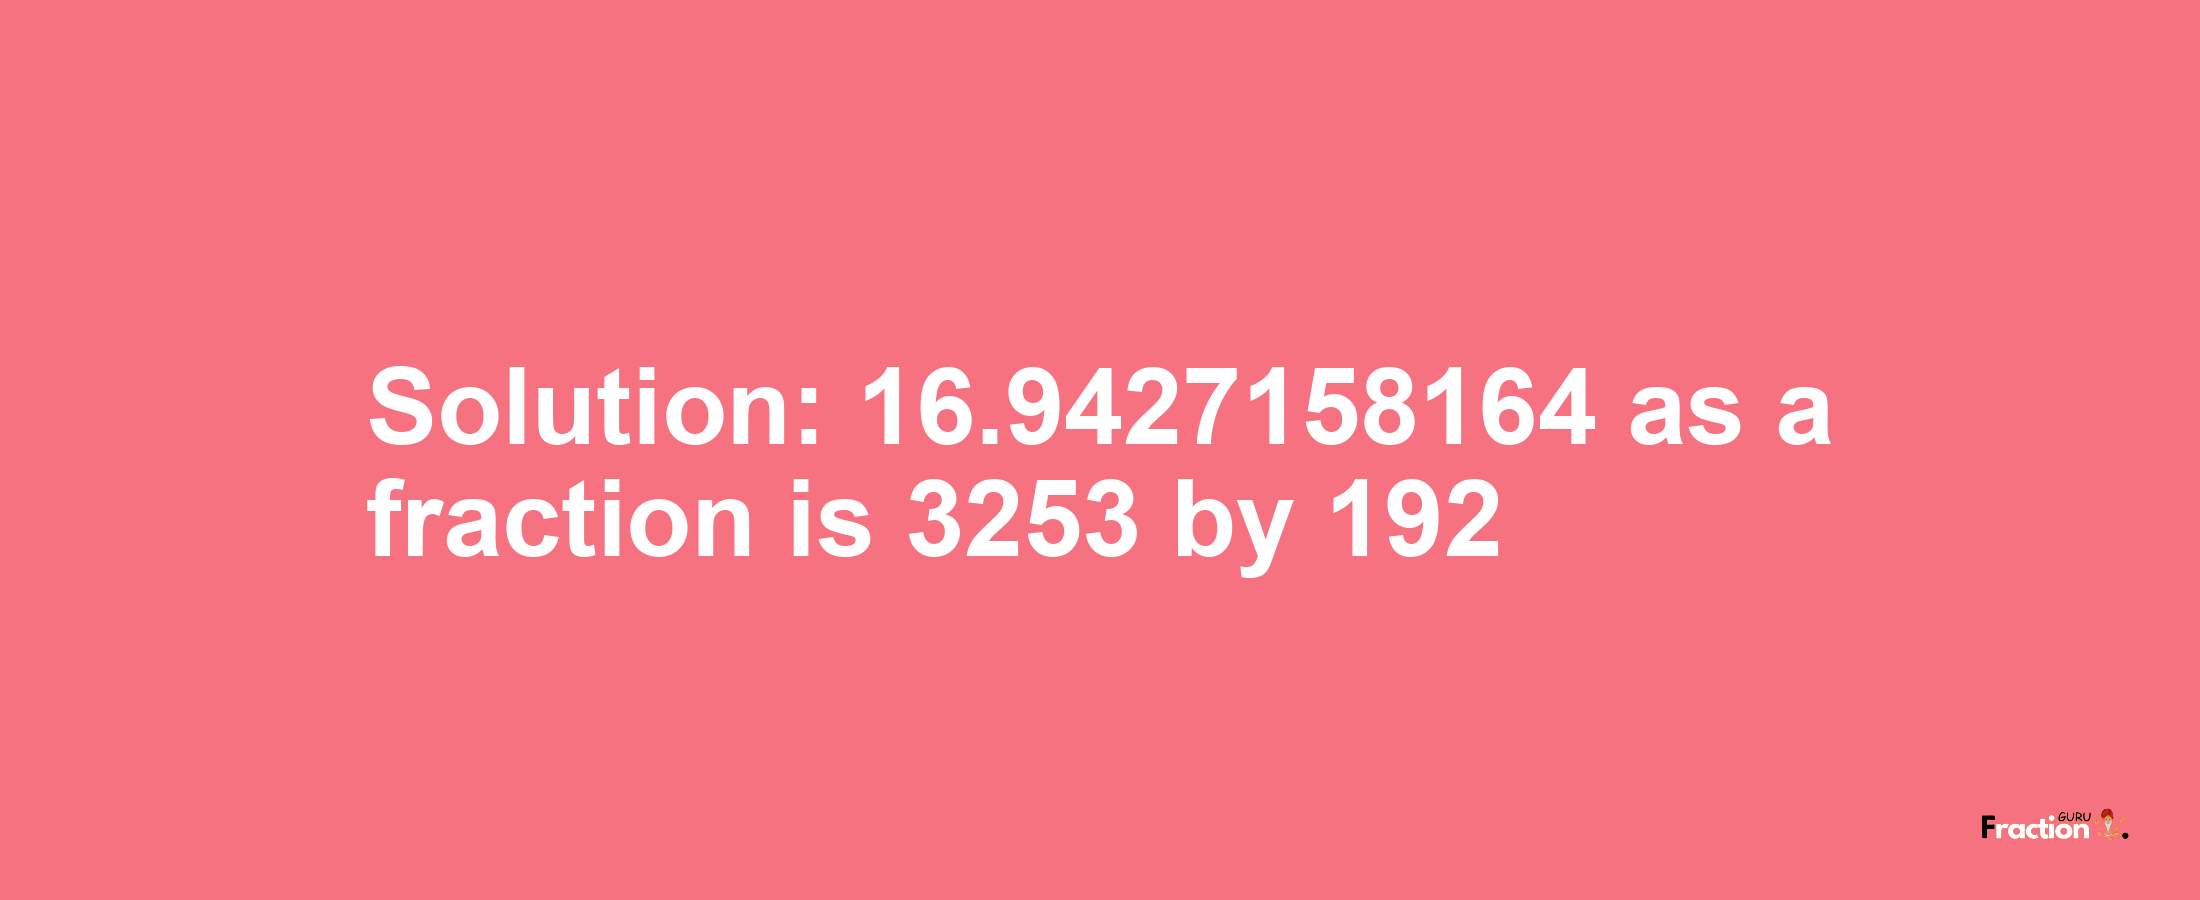 Solution:16.9427158164 as a fraction is 3253/192